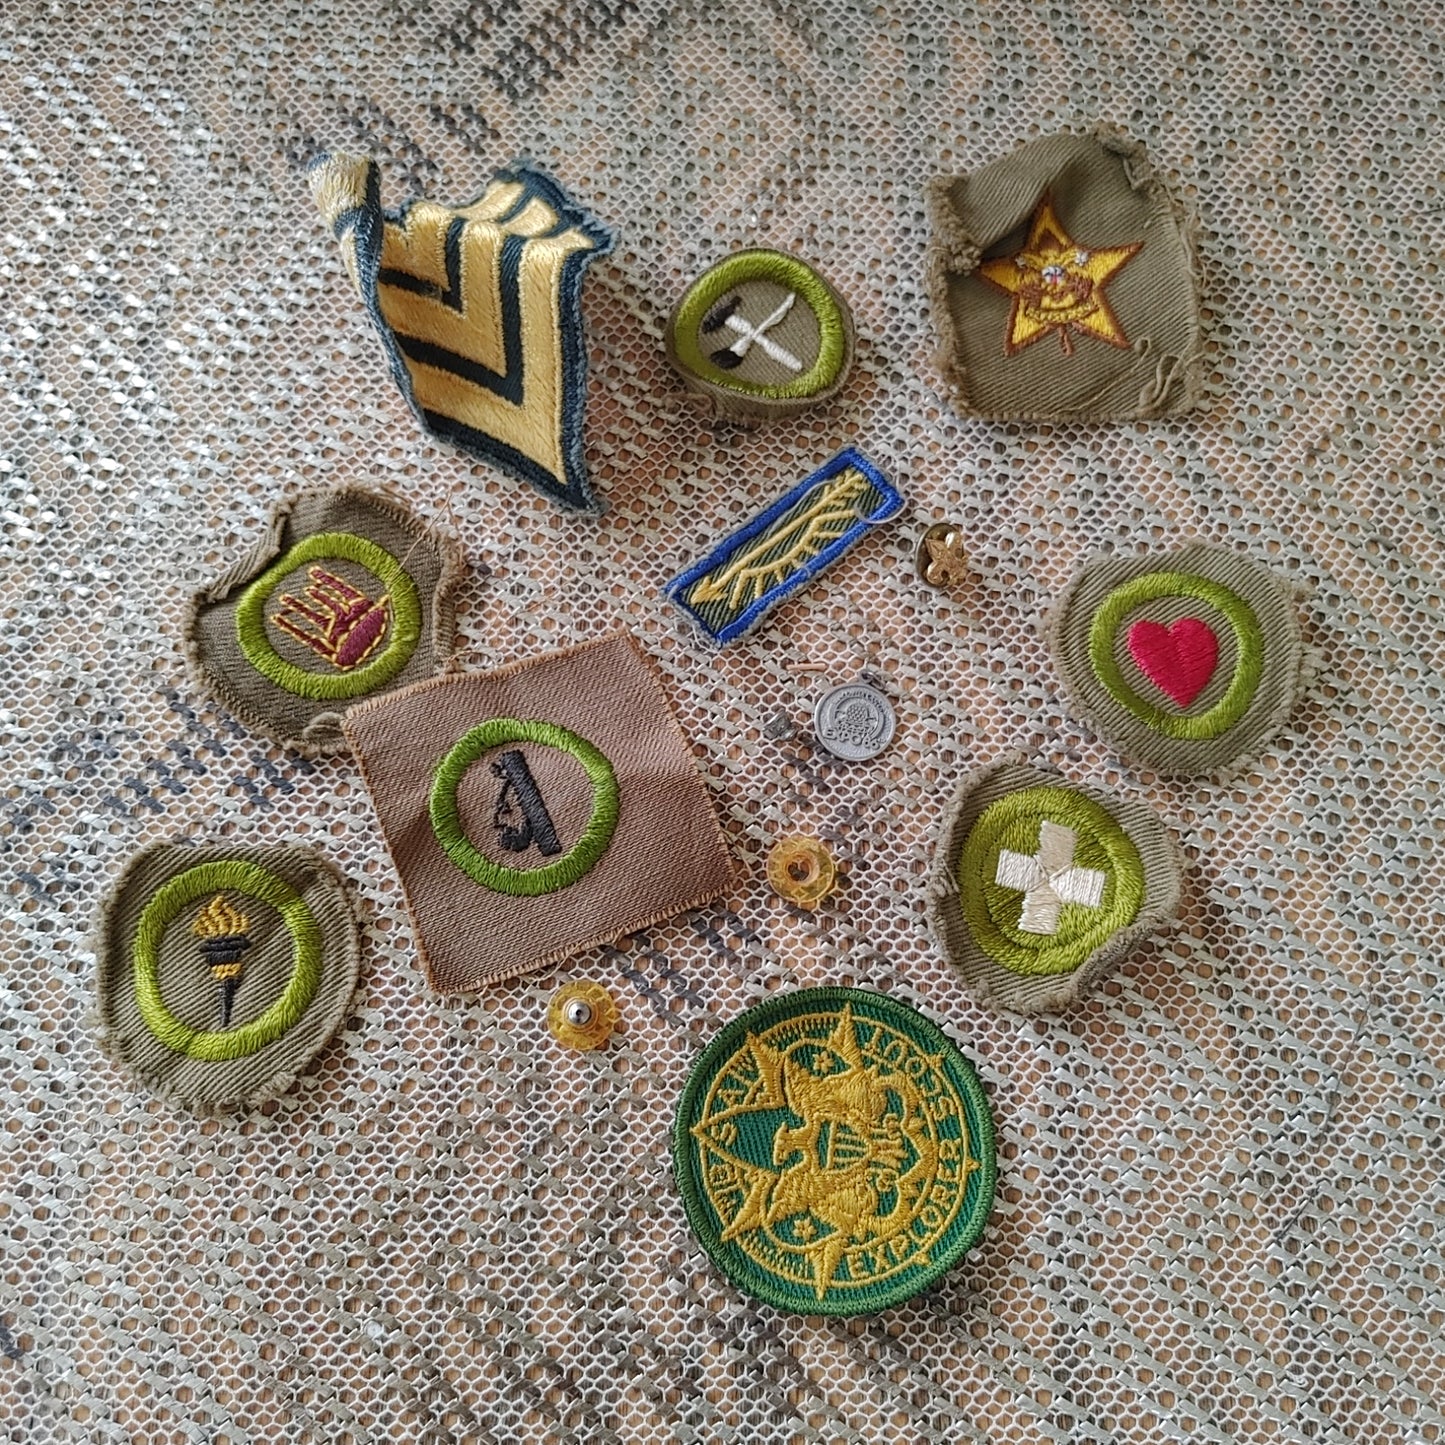 Club Group Secret Society Vintage Mixed Lot Masons Boy Girl Scouts Patches Pins